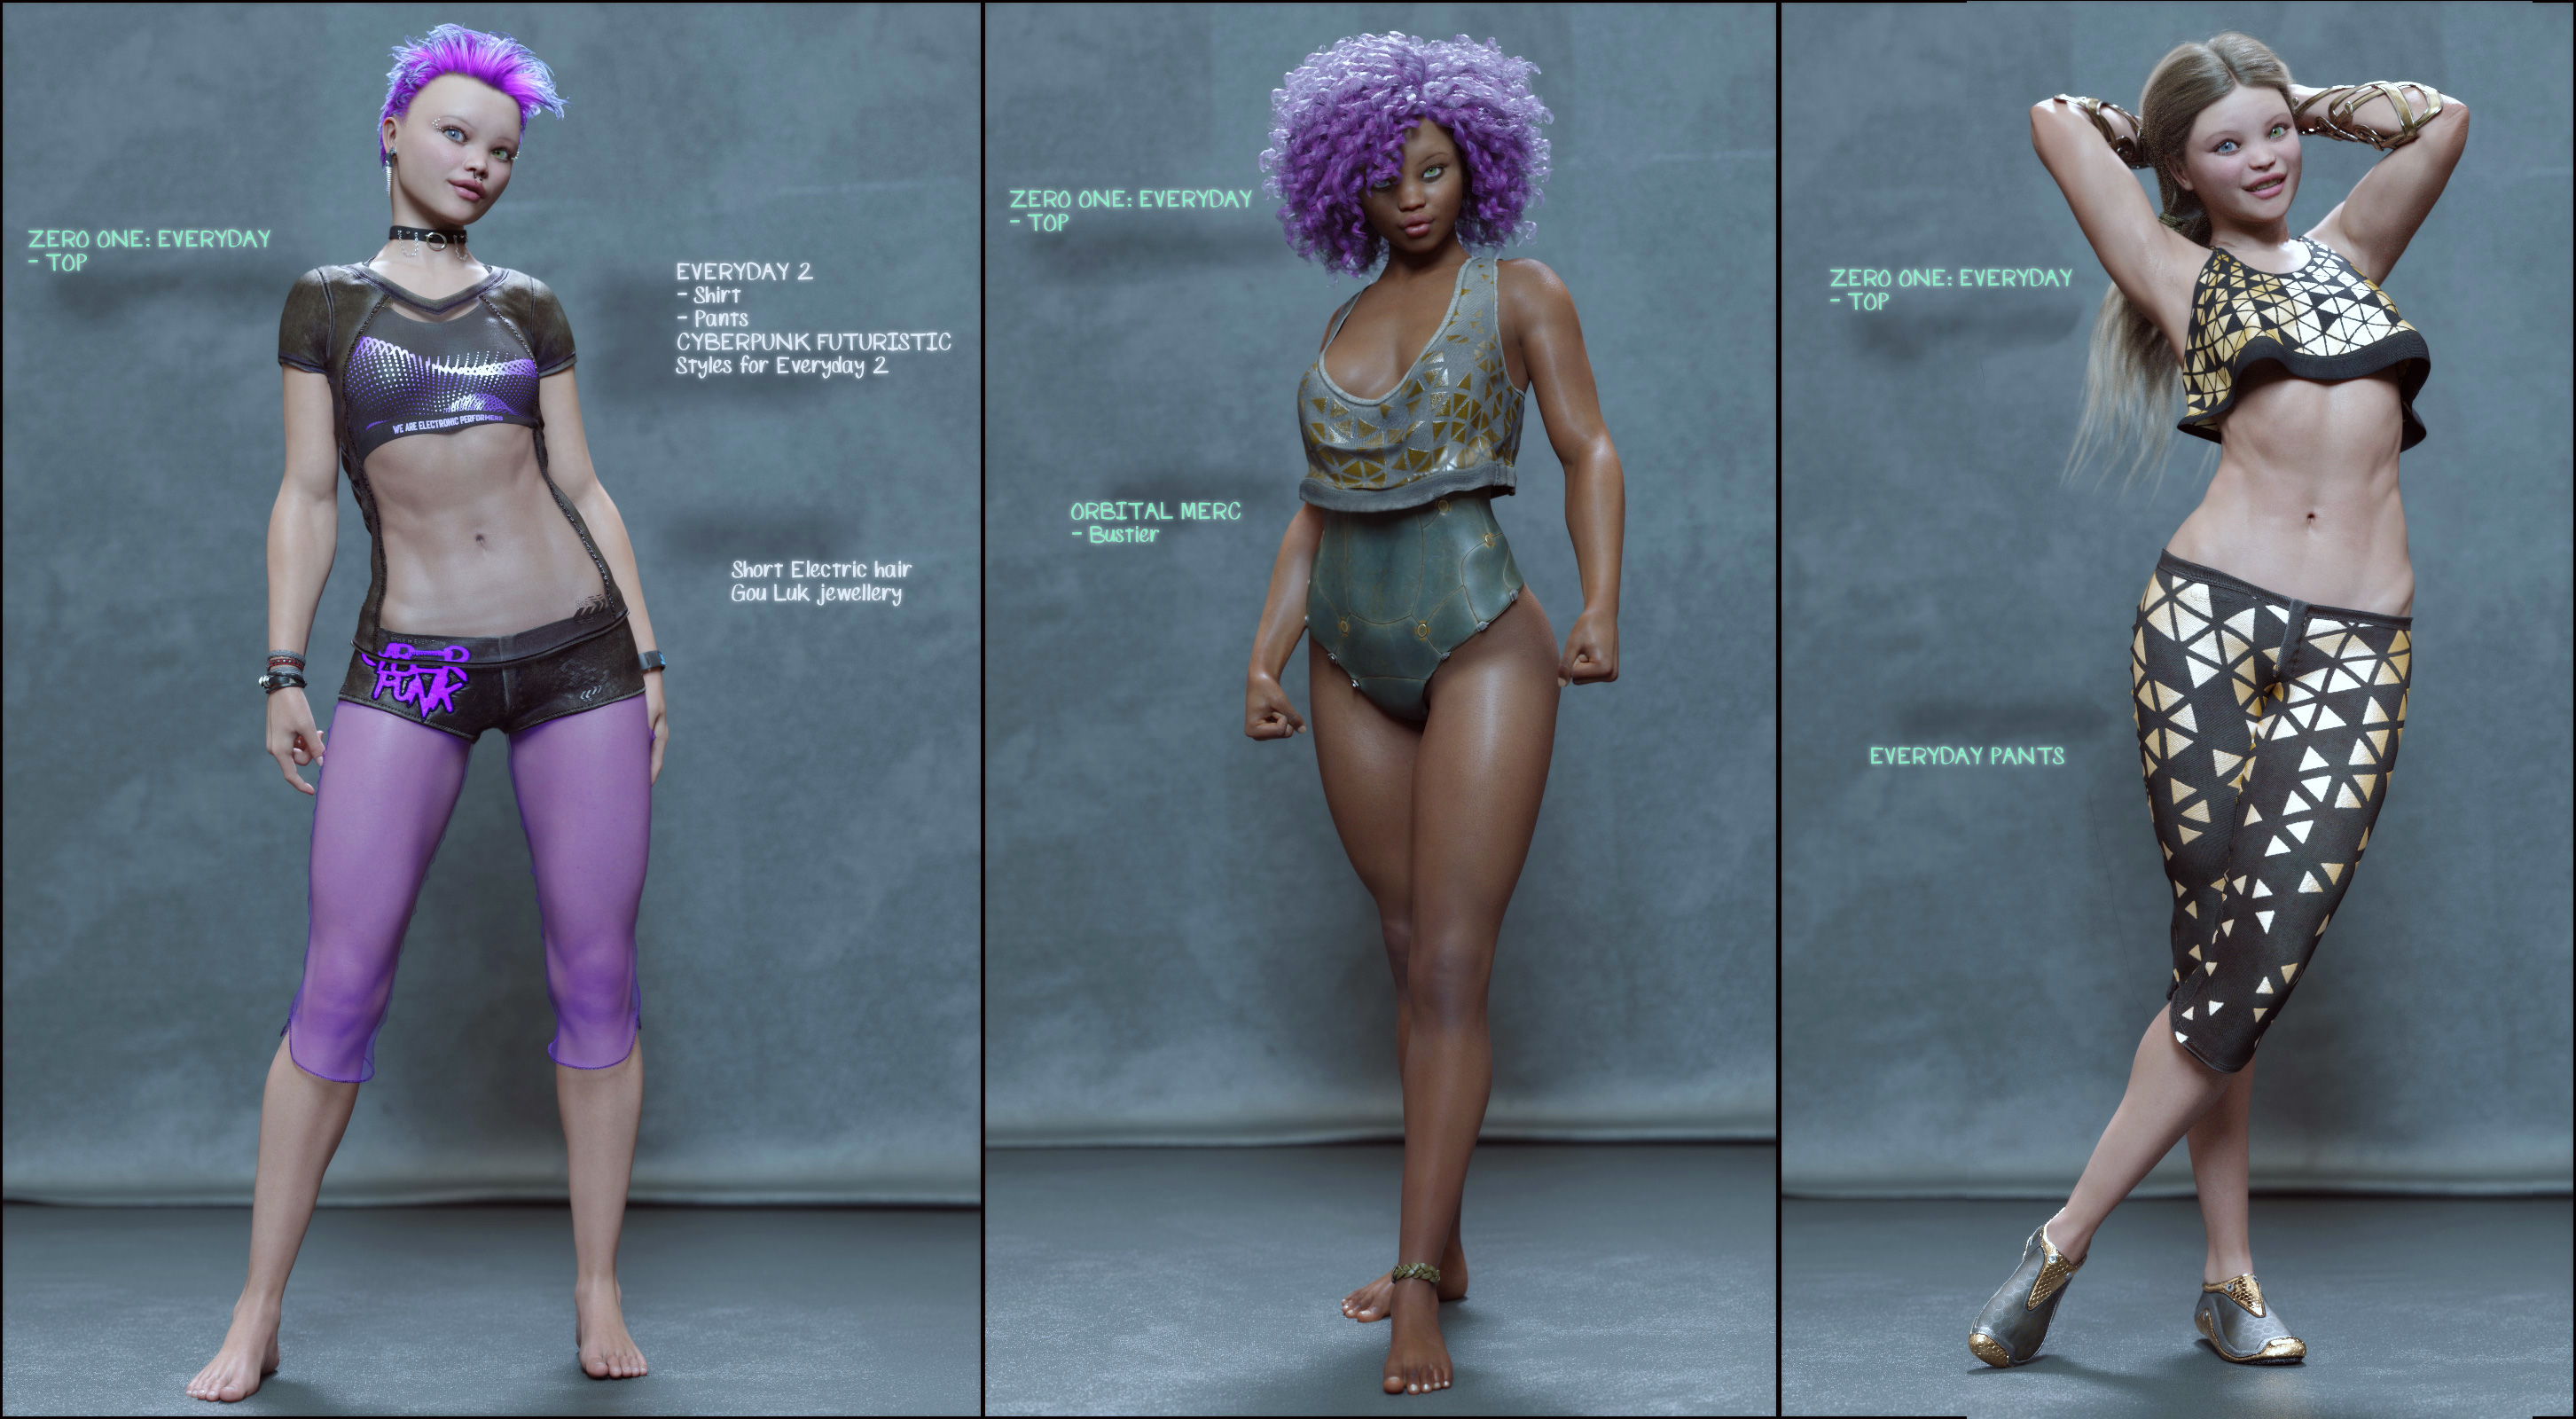 Customize Vol 1 for Zero One: Everyday by: Aeon Soul, 3D Models by Daz 3D